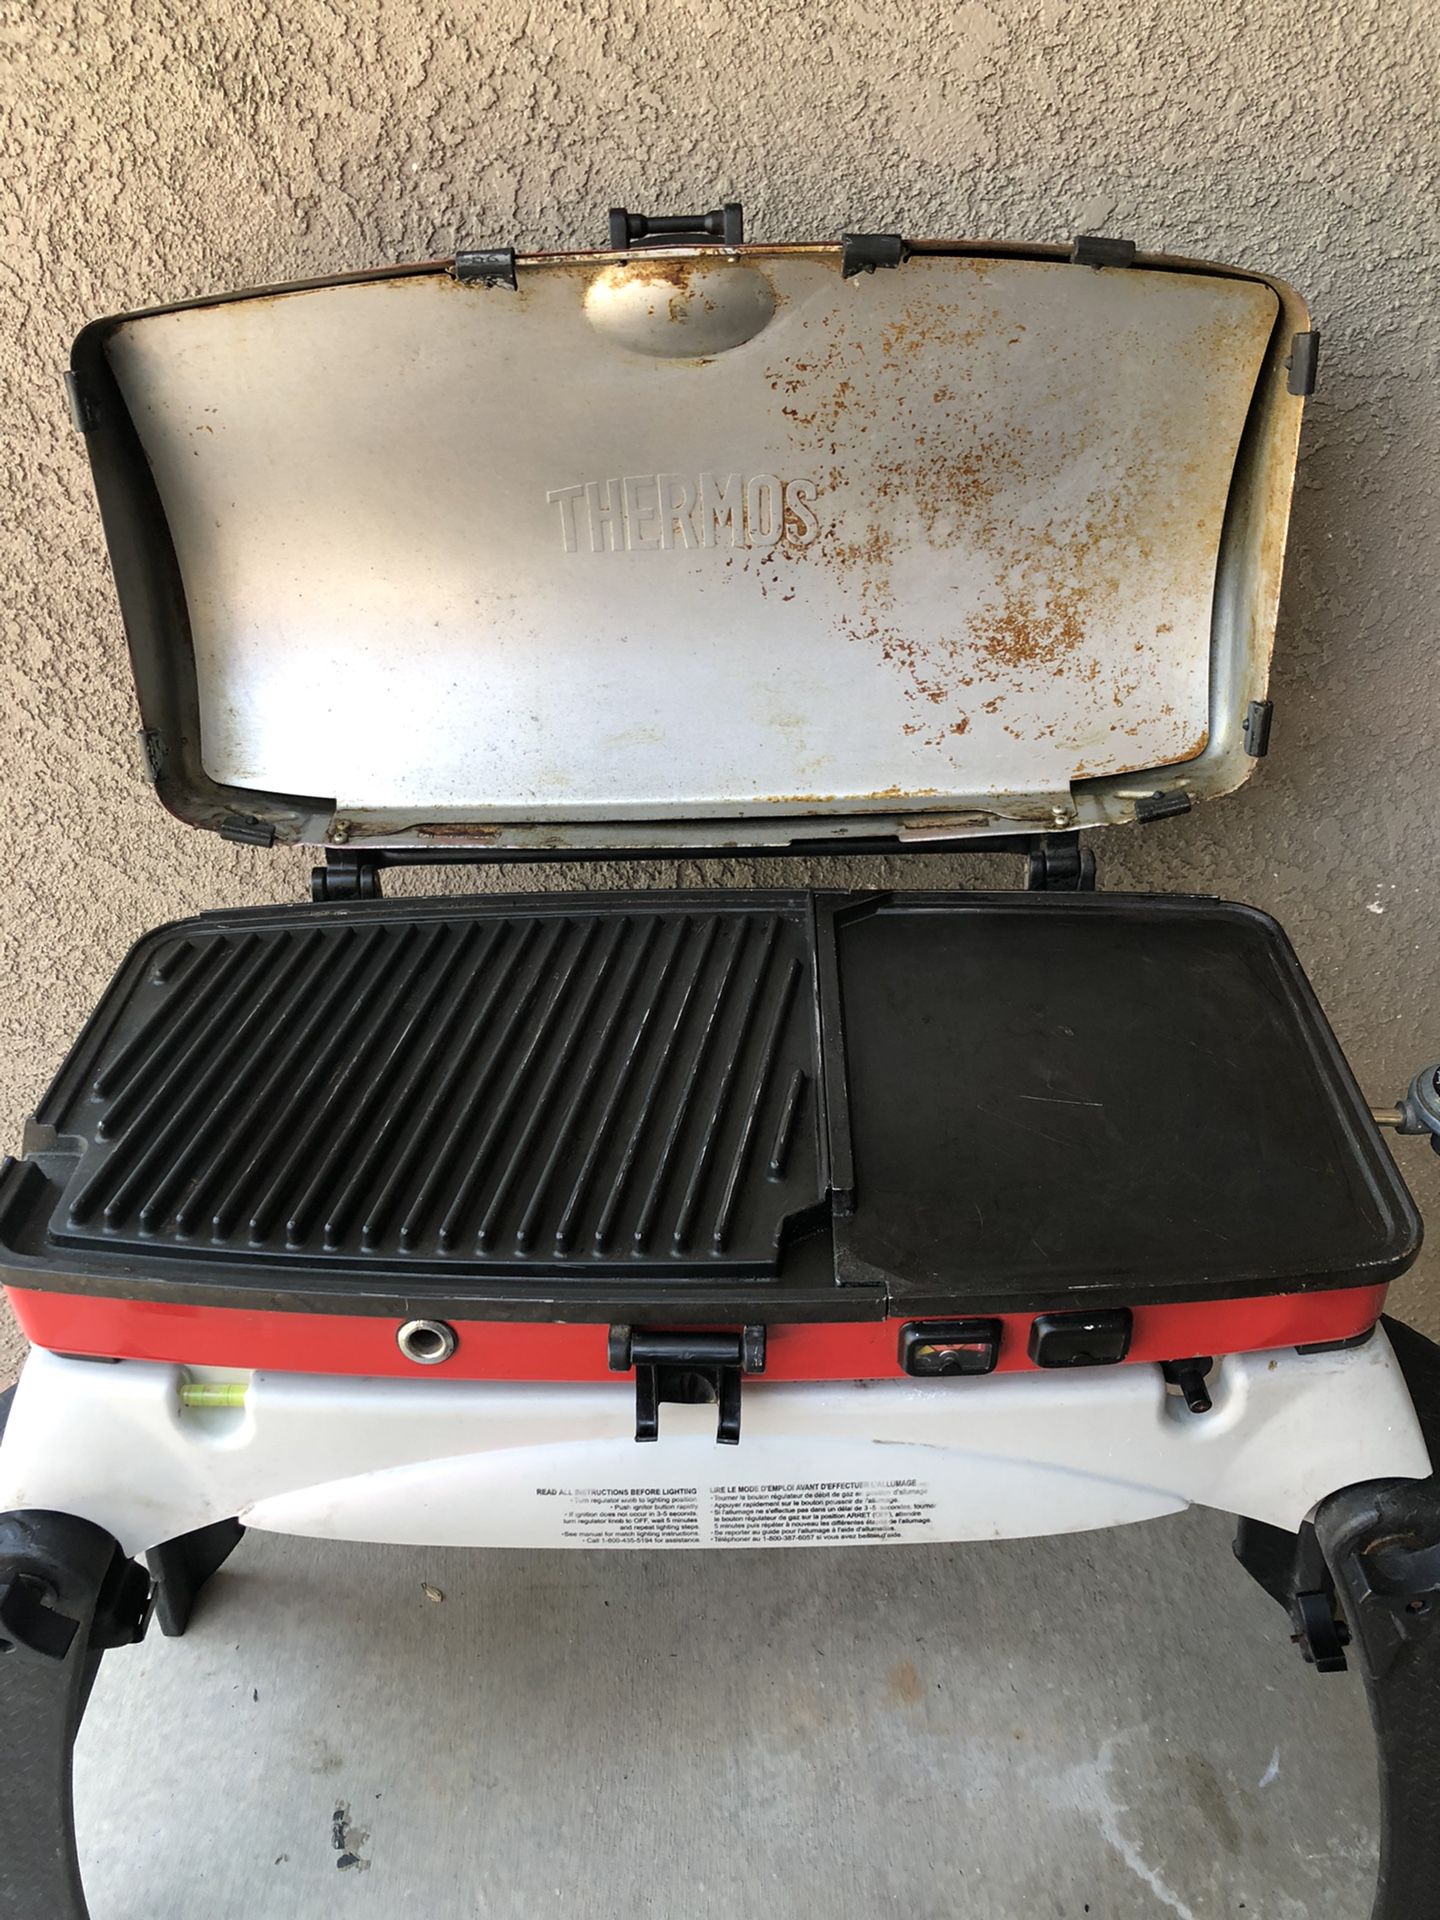 Thermos Grill 2 Go BBQ in Upland, CA - OfferUp